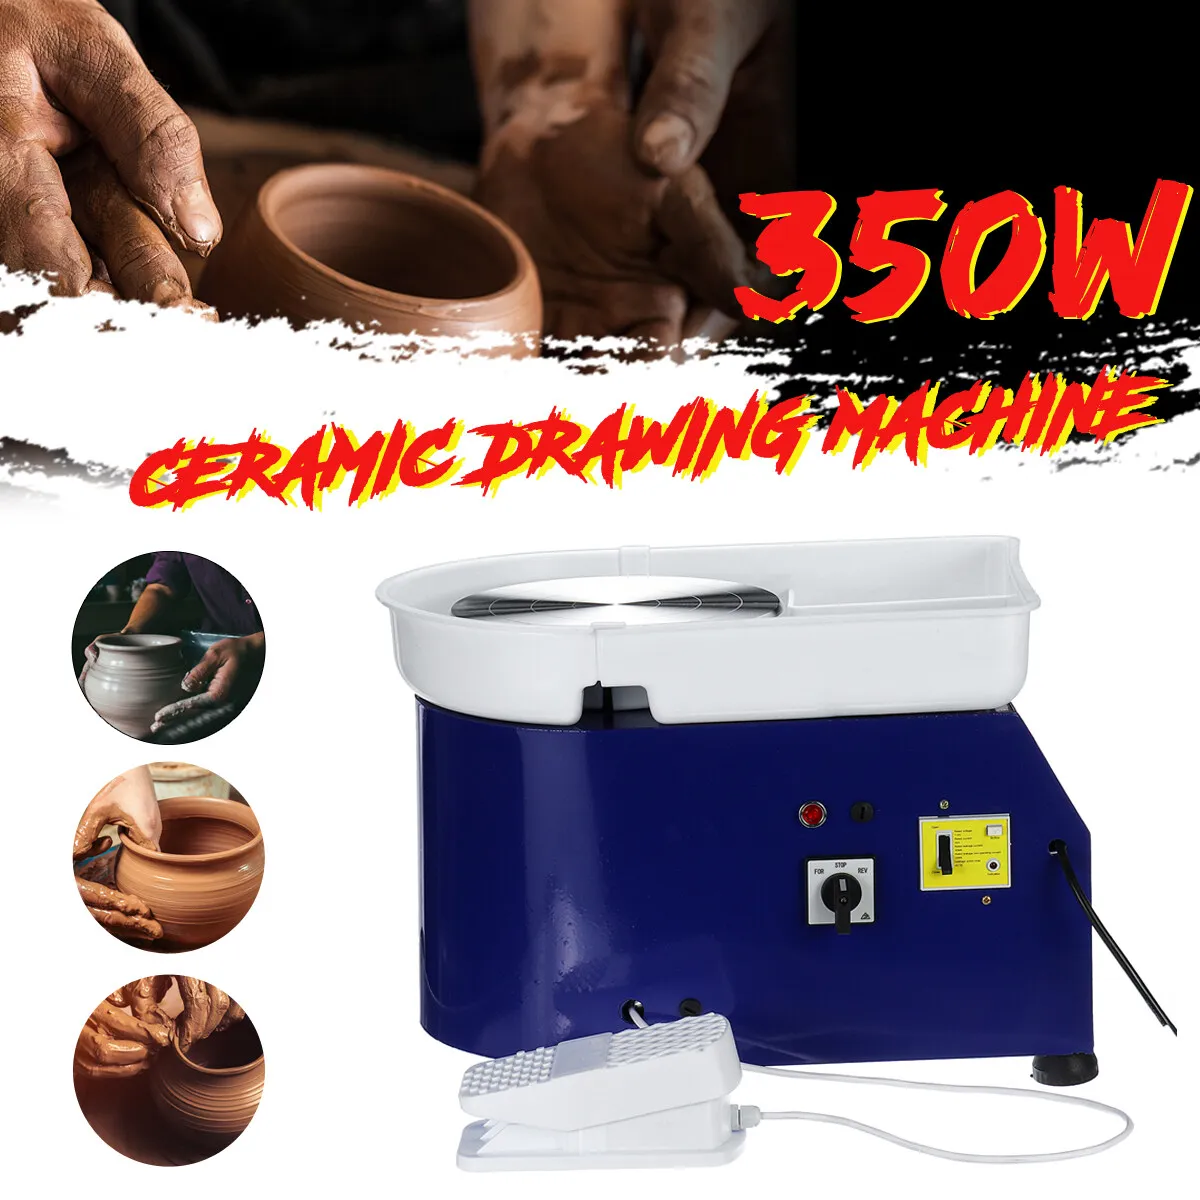 

220V /110V DIY 25CM 350W Electric Pottery Wheel Ceramic Machine Foot Pedal Clay Pottery Forming Ceramic Works Art Work